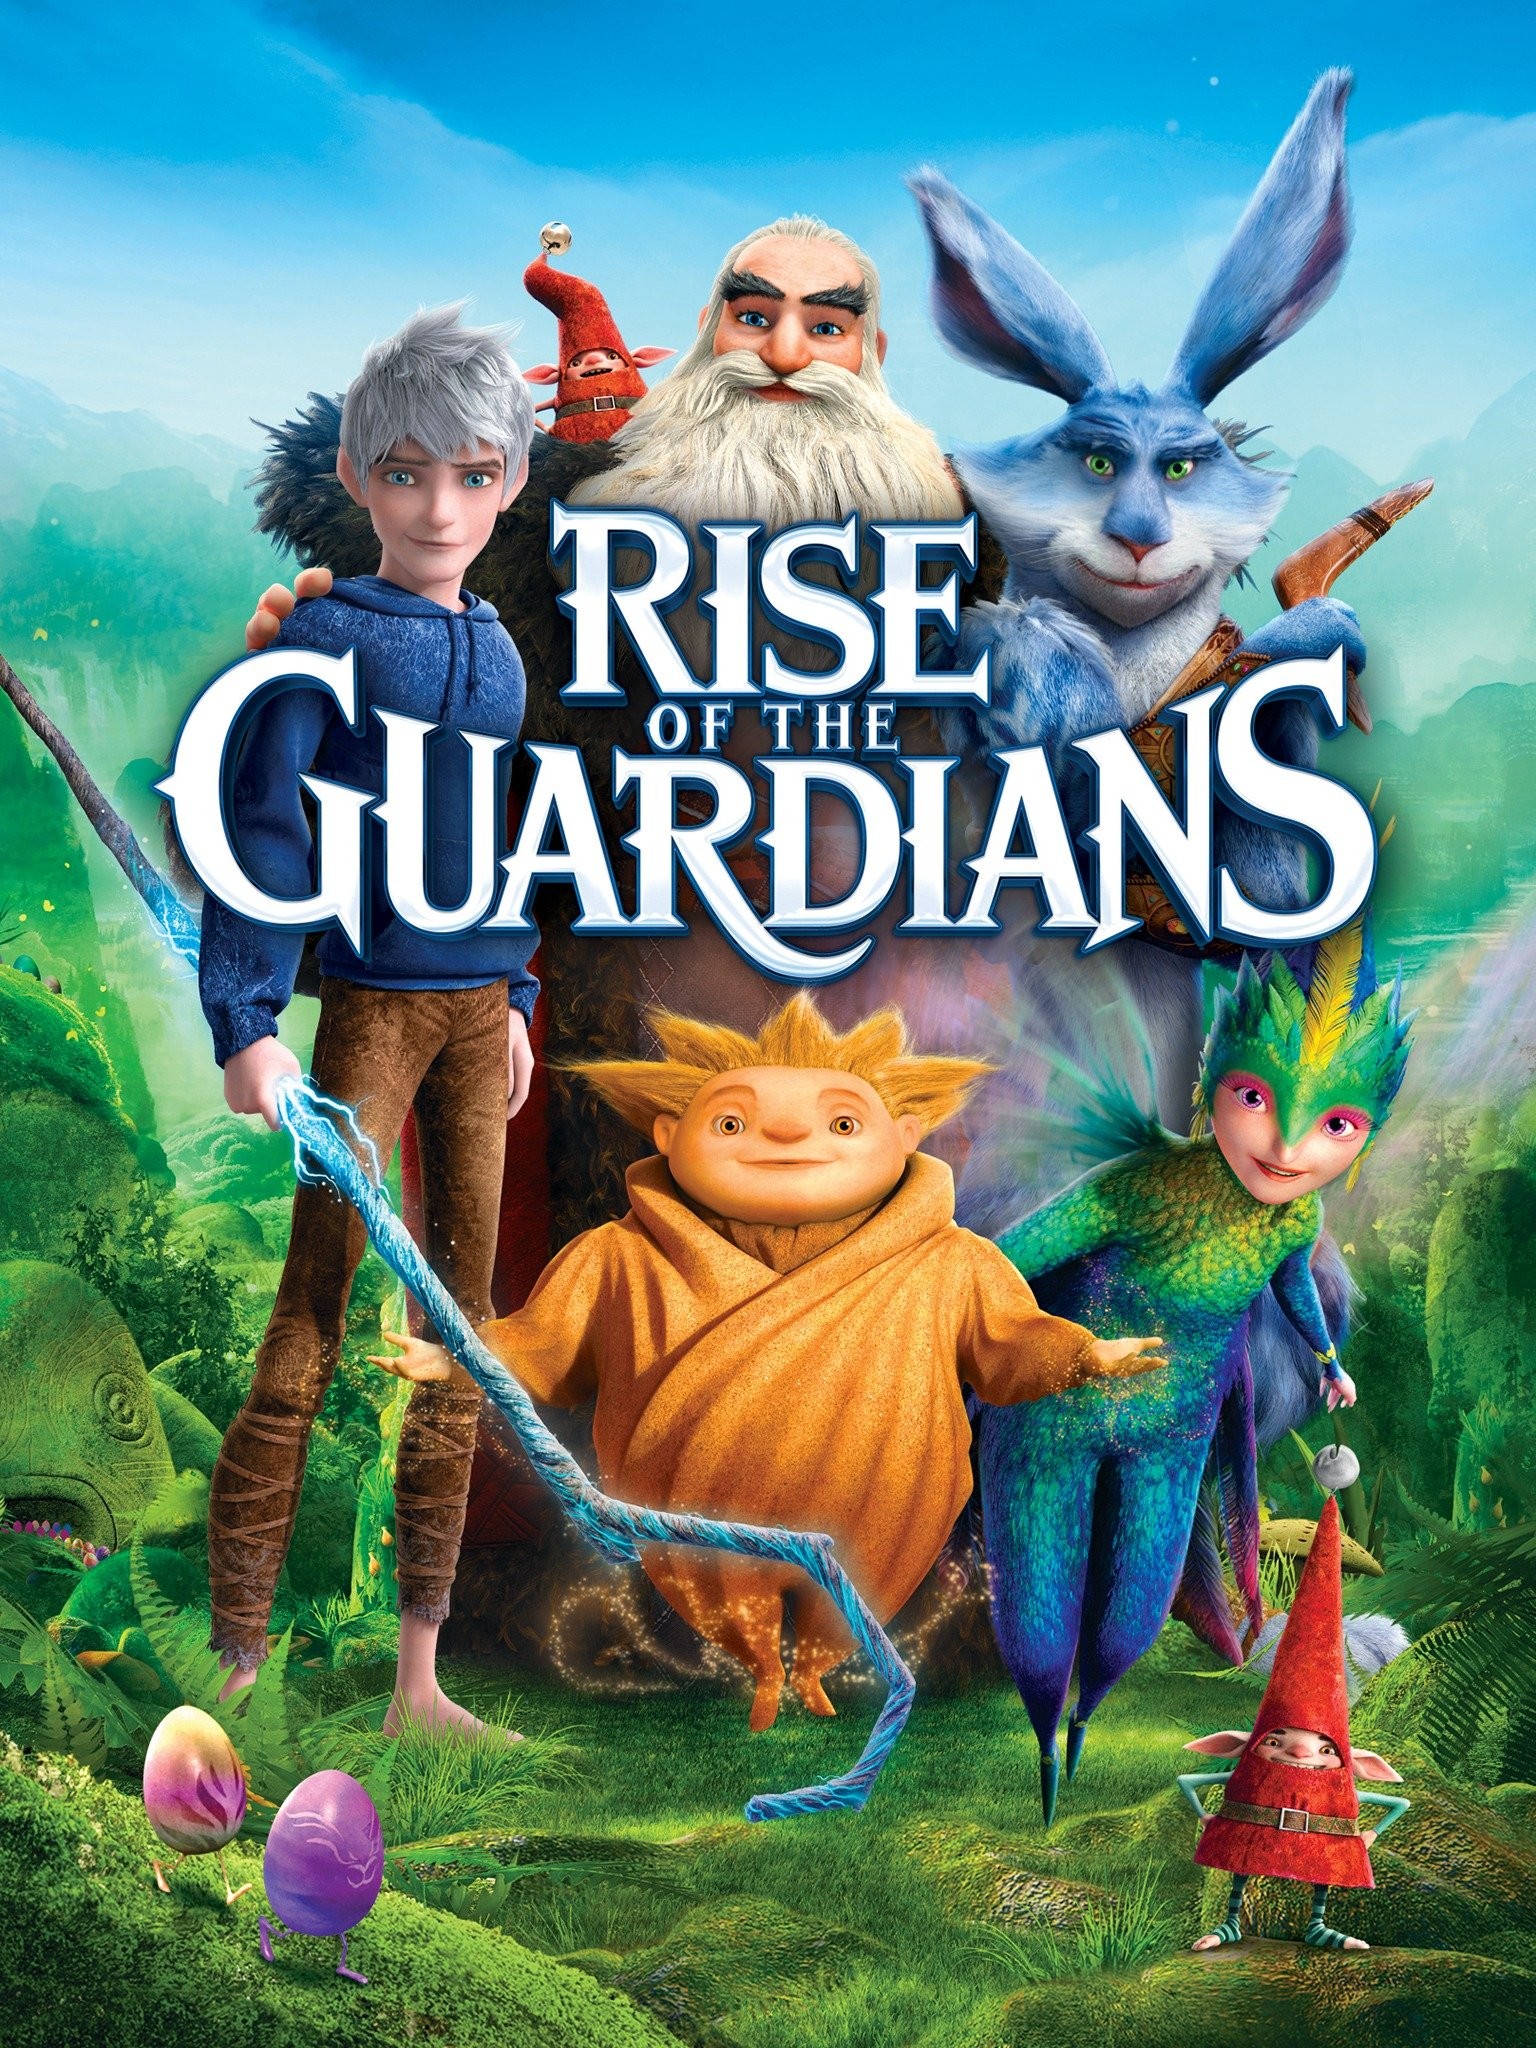 The-Rise-of-the-Guardians-1-1